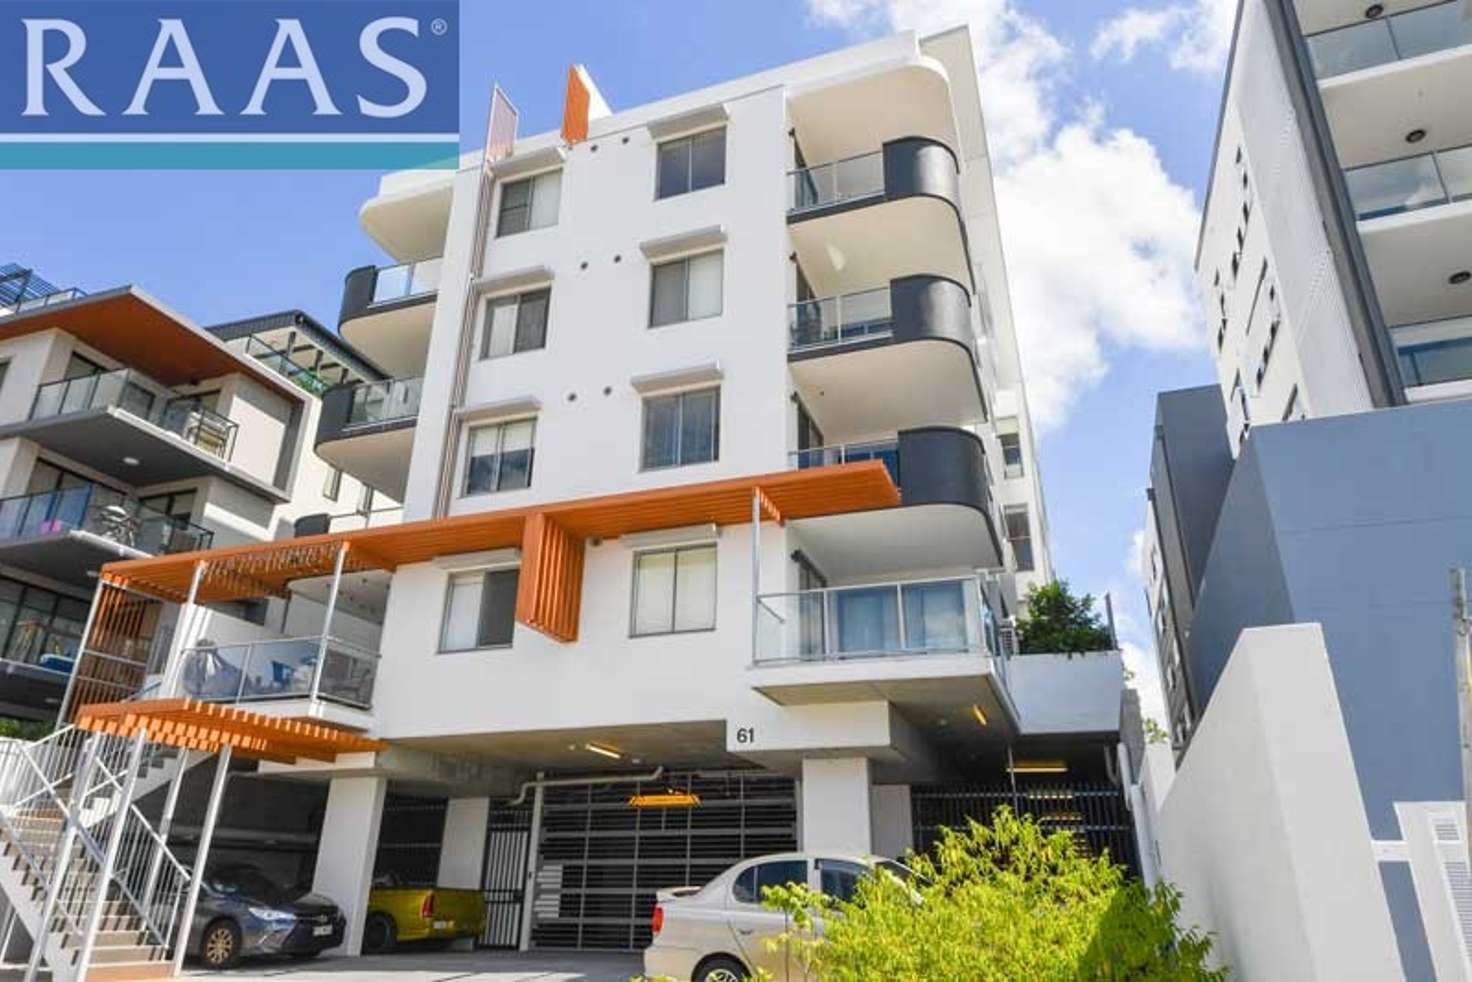 Main view of Homely apartment listing, 23/61 Ludwick street, Cannon Hill QLD 4170